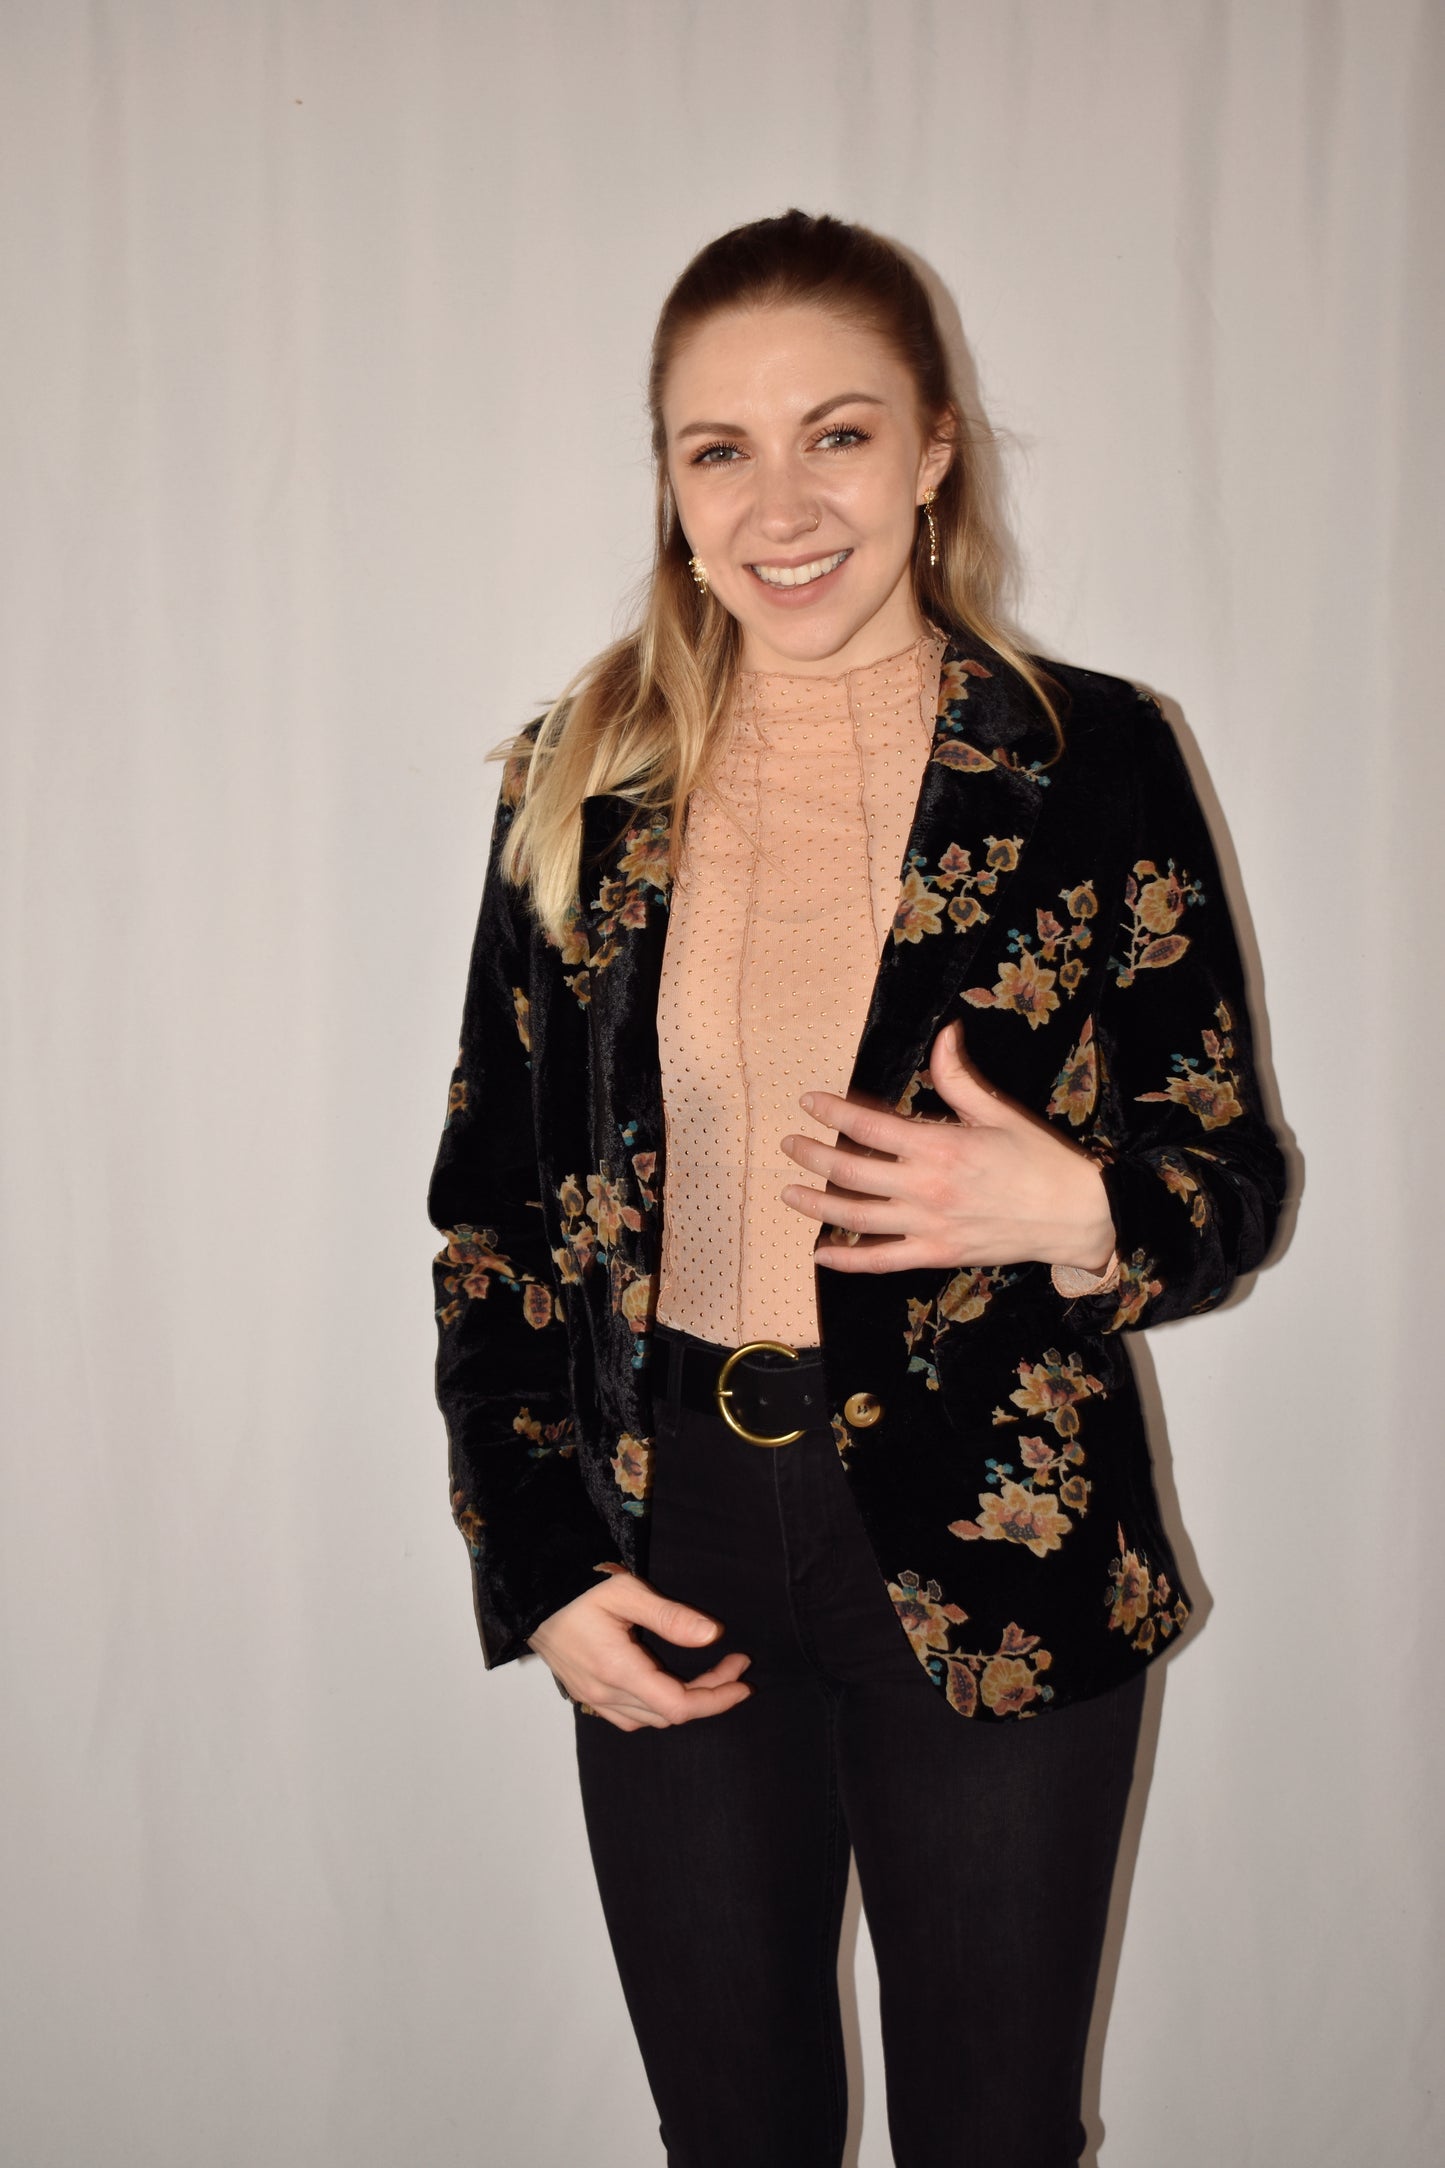 black floral velvet blazer with single button enclosure and full length